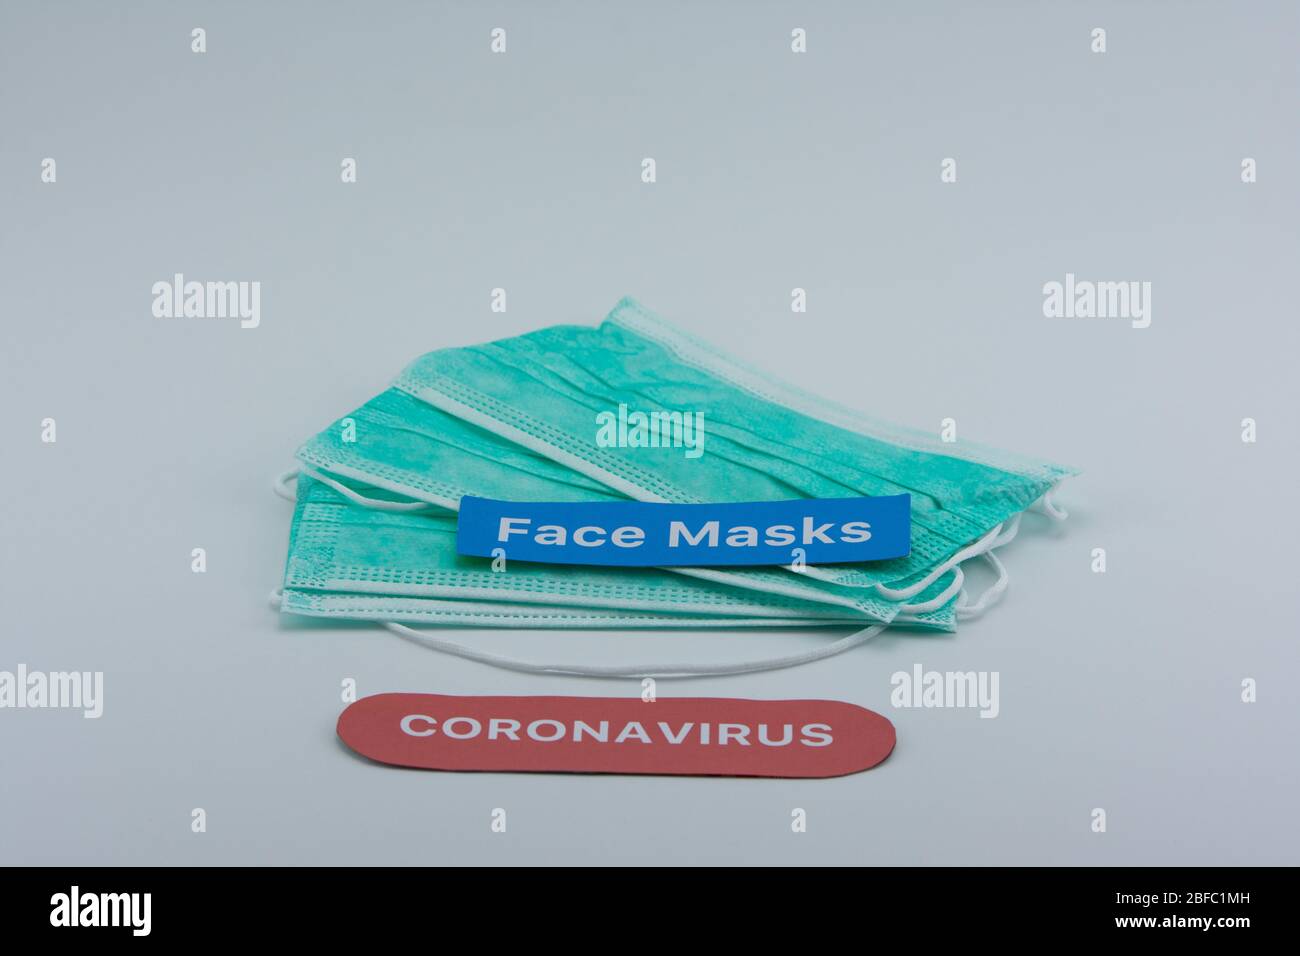 Surgical protective mask for protection against coronavirus. Stock Photo